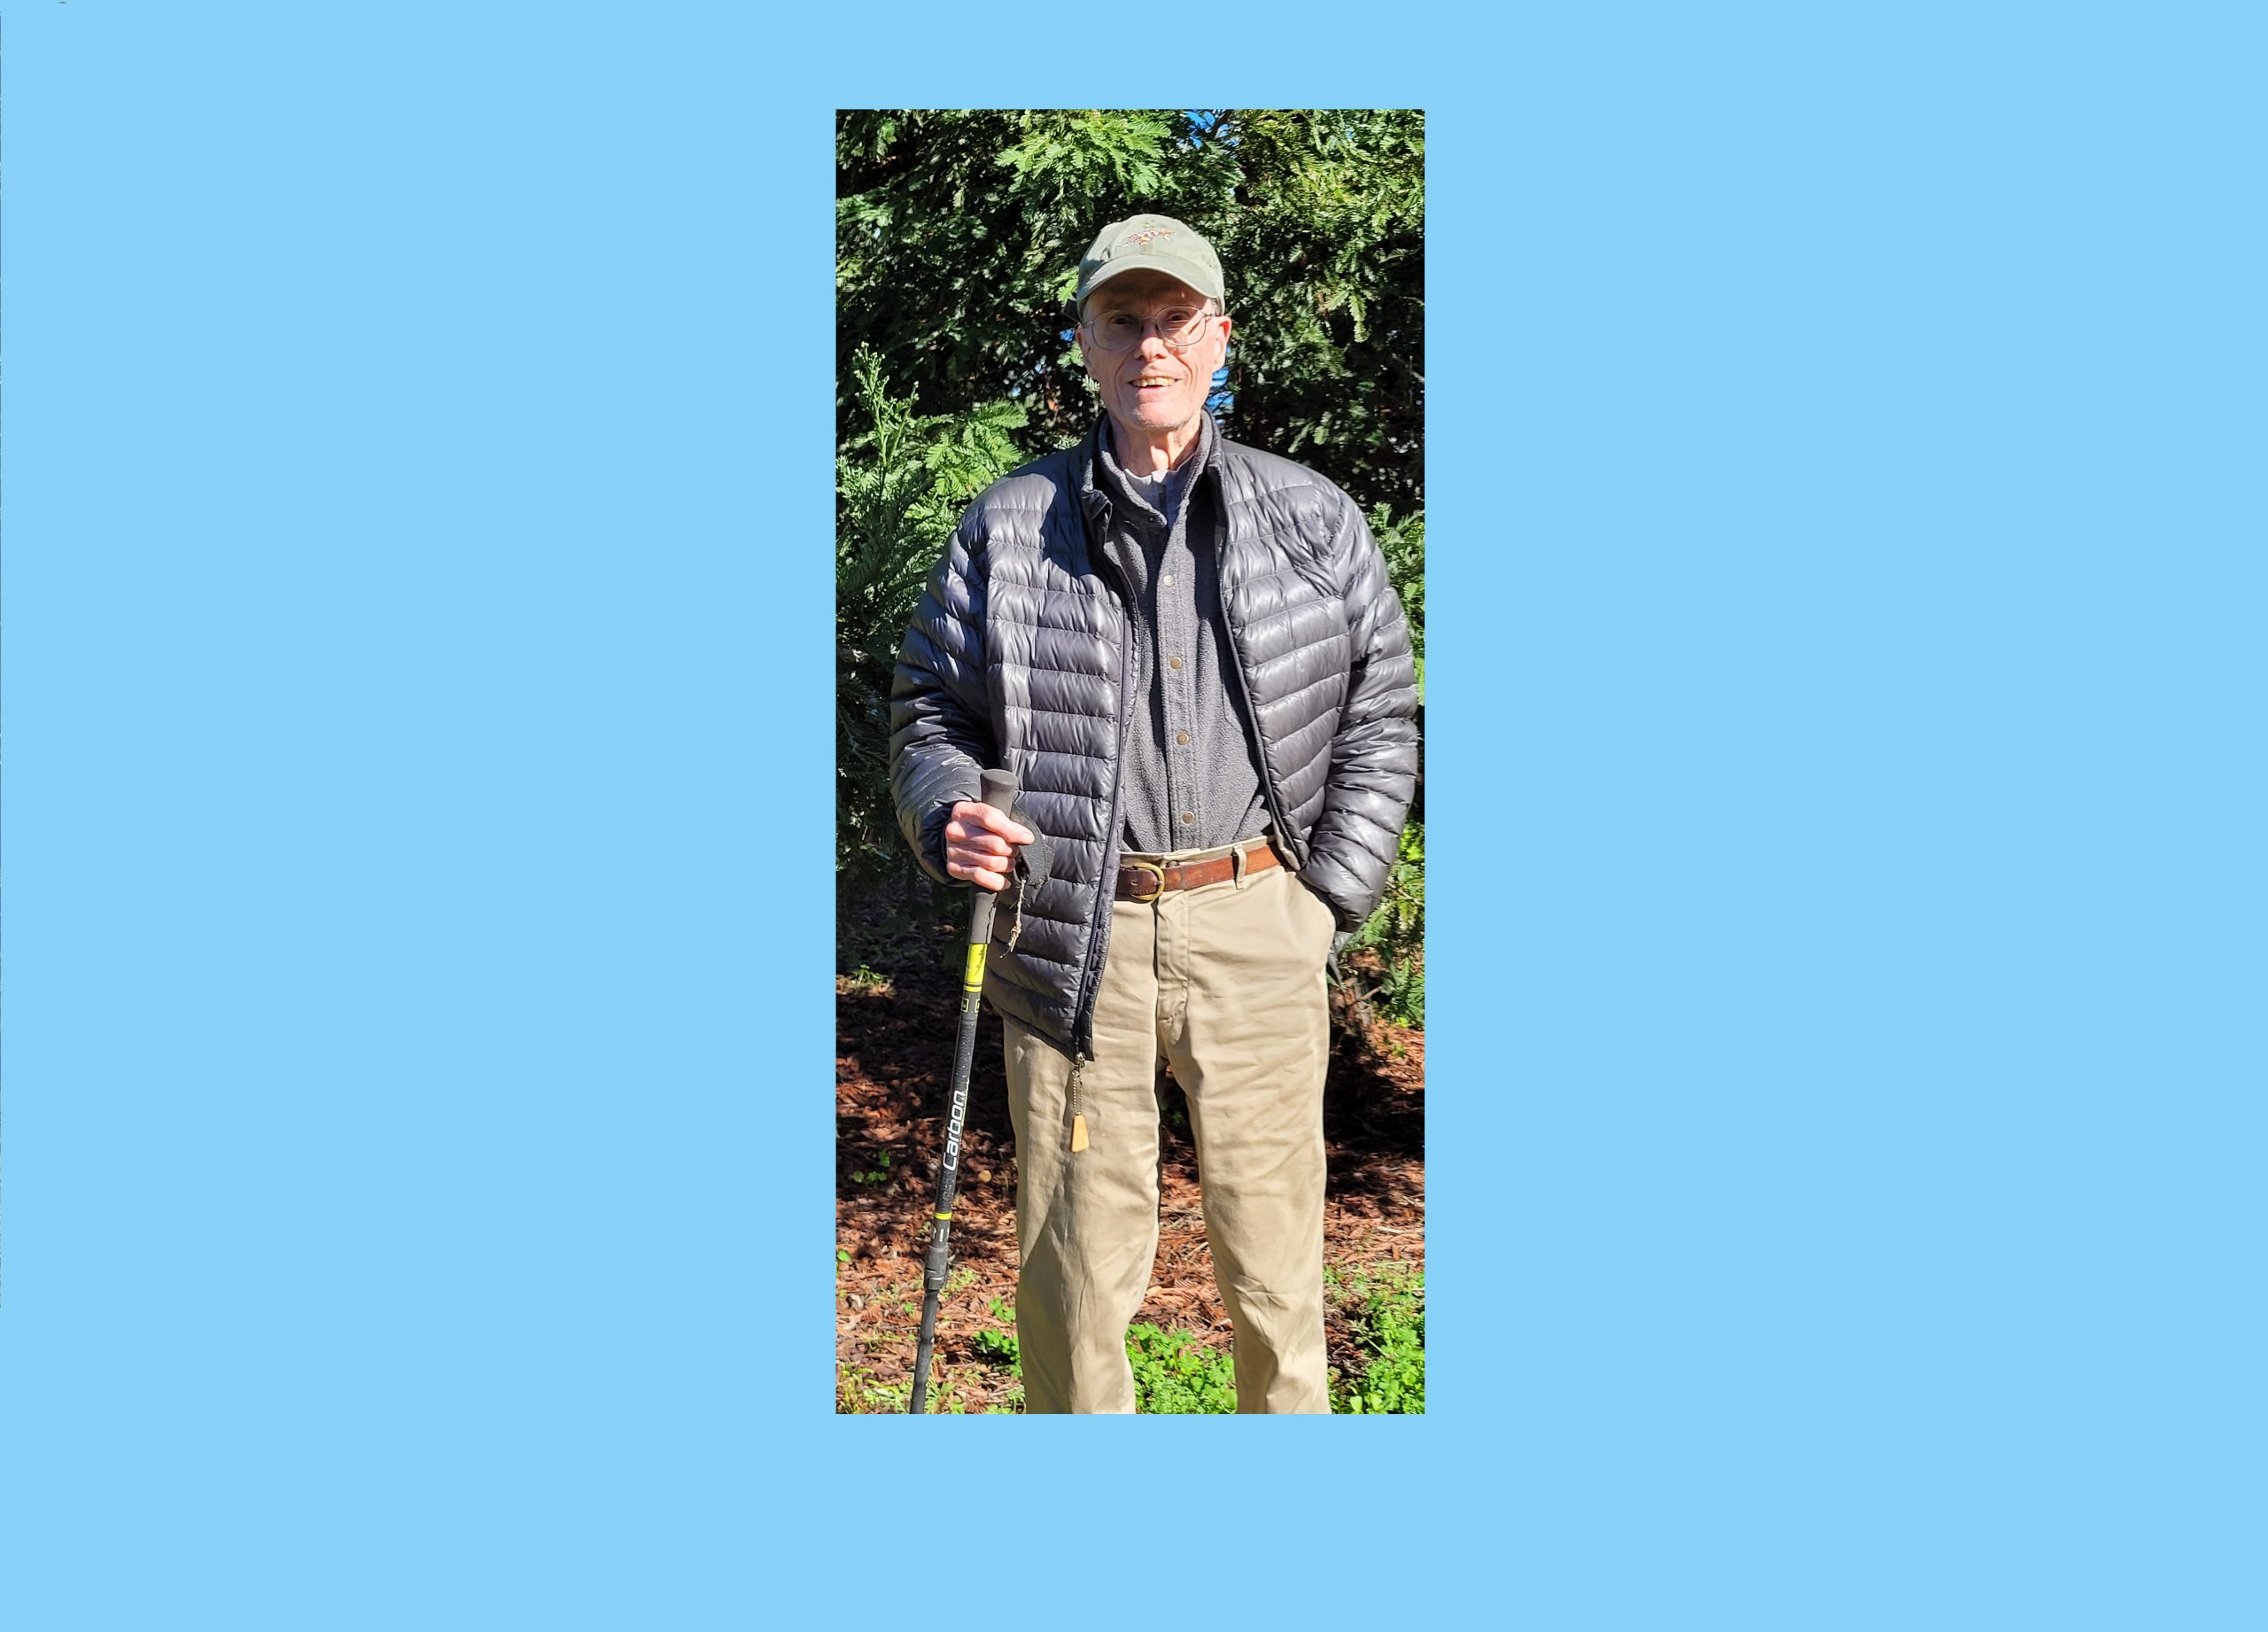 Older Caucasian man with tan baseball cap, charcoal gray puffy vest, charcoal gray long-sleeved shirt, khakis carrying a walking stick in front of evergreen trees with a blue border around the photo